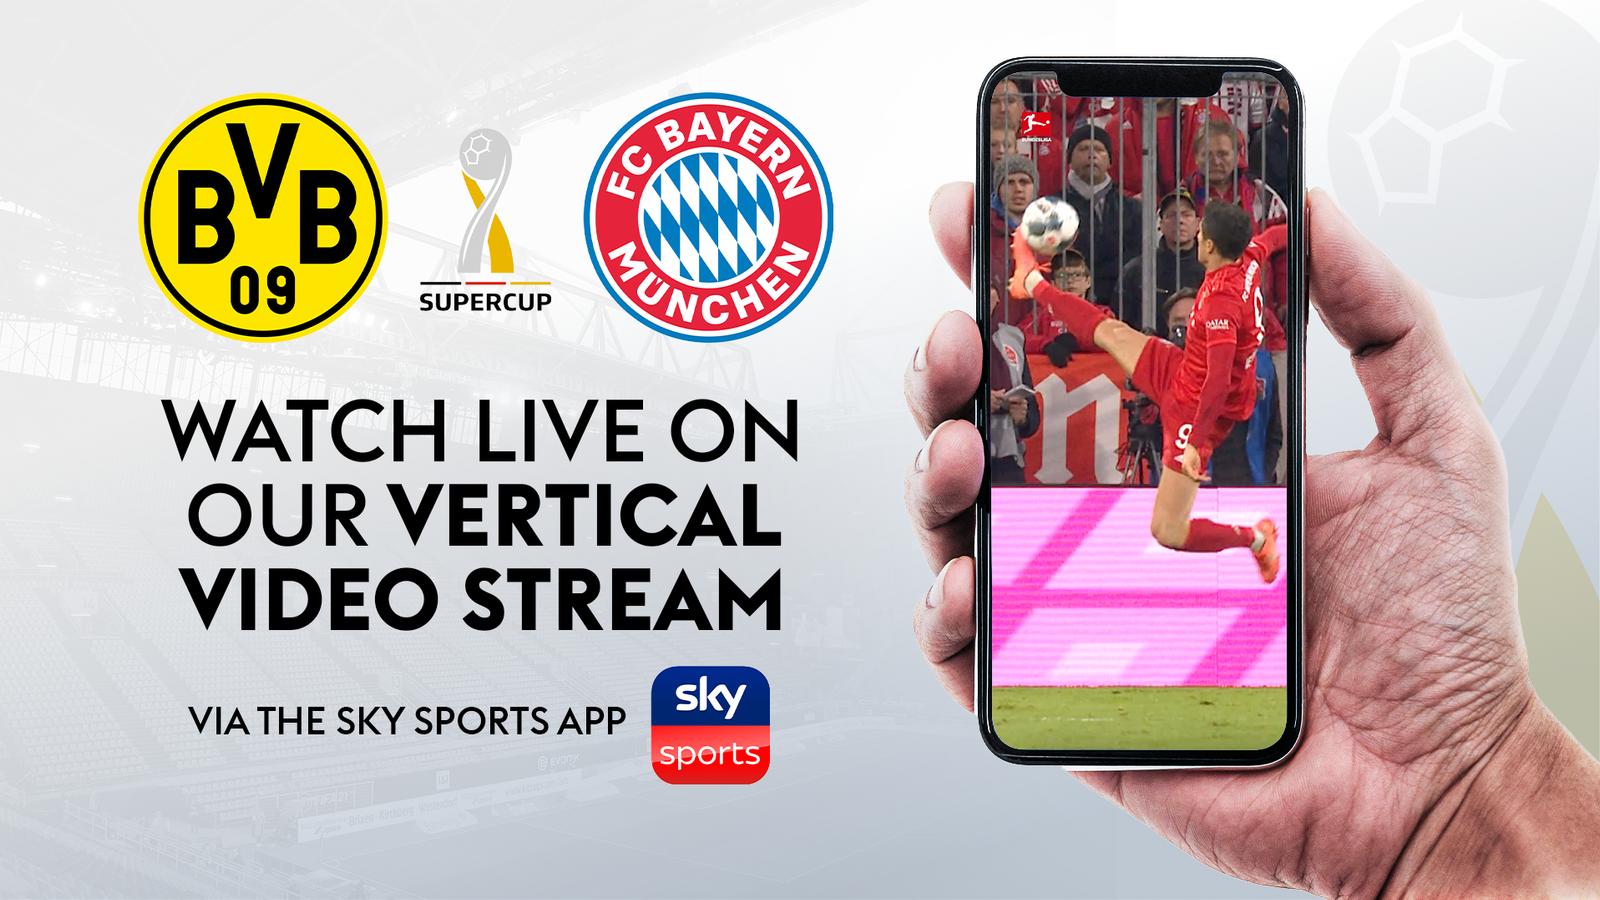 Sky Sports debuts its first-ever mobile-friendly vertical livestream iMore